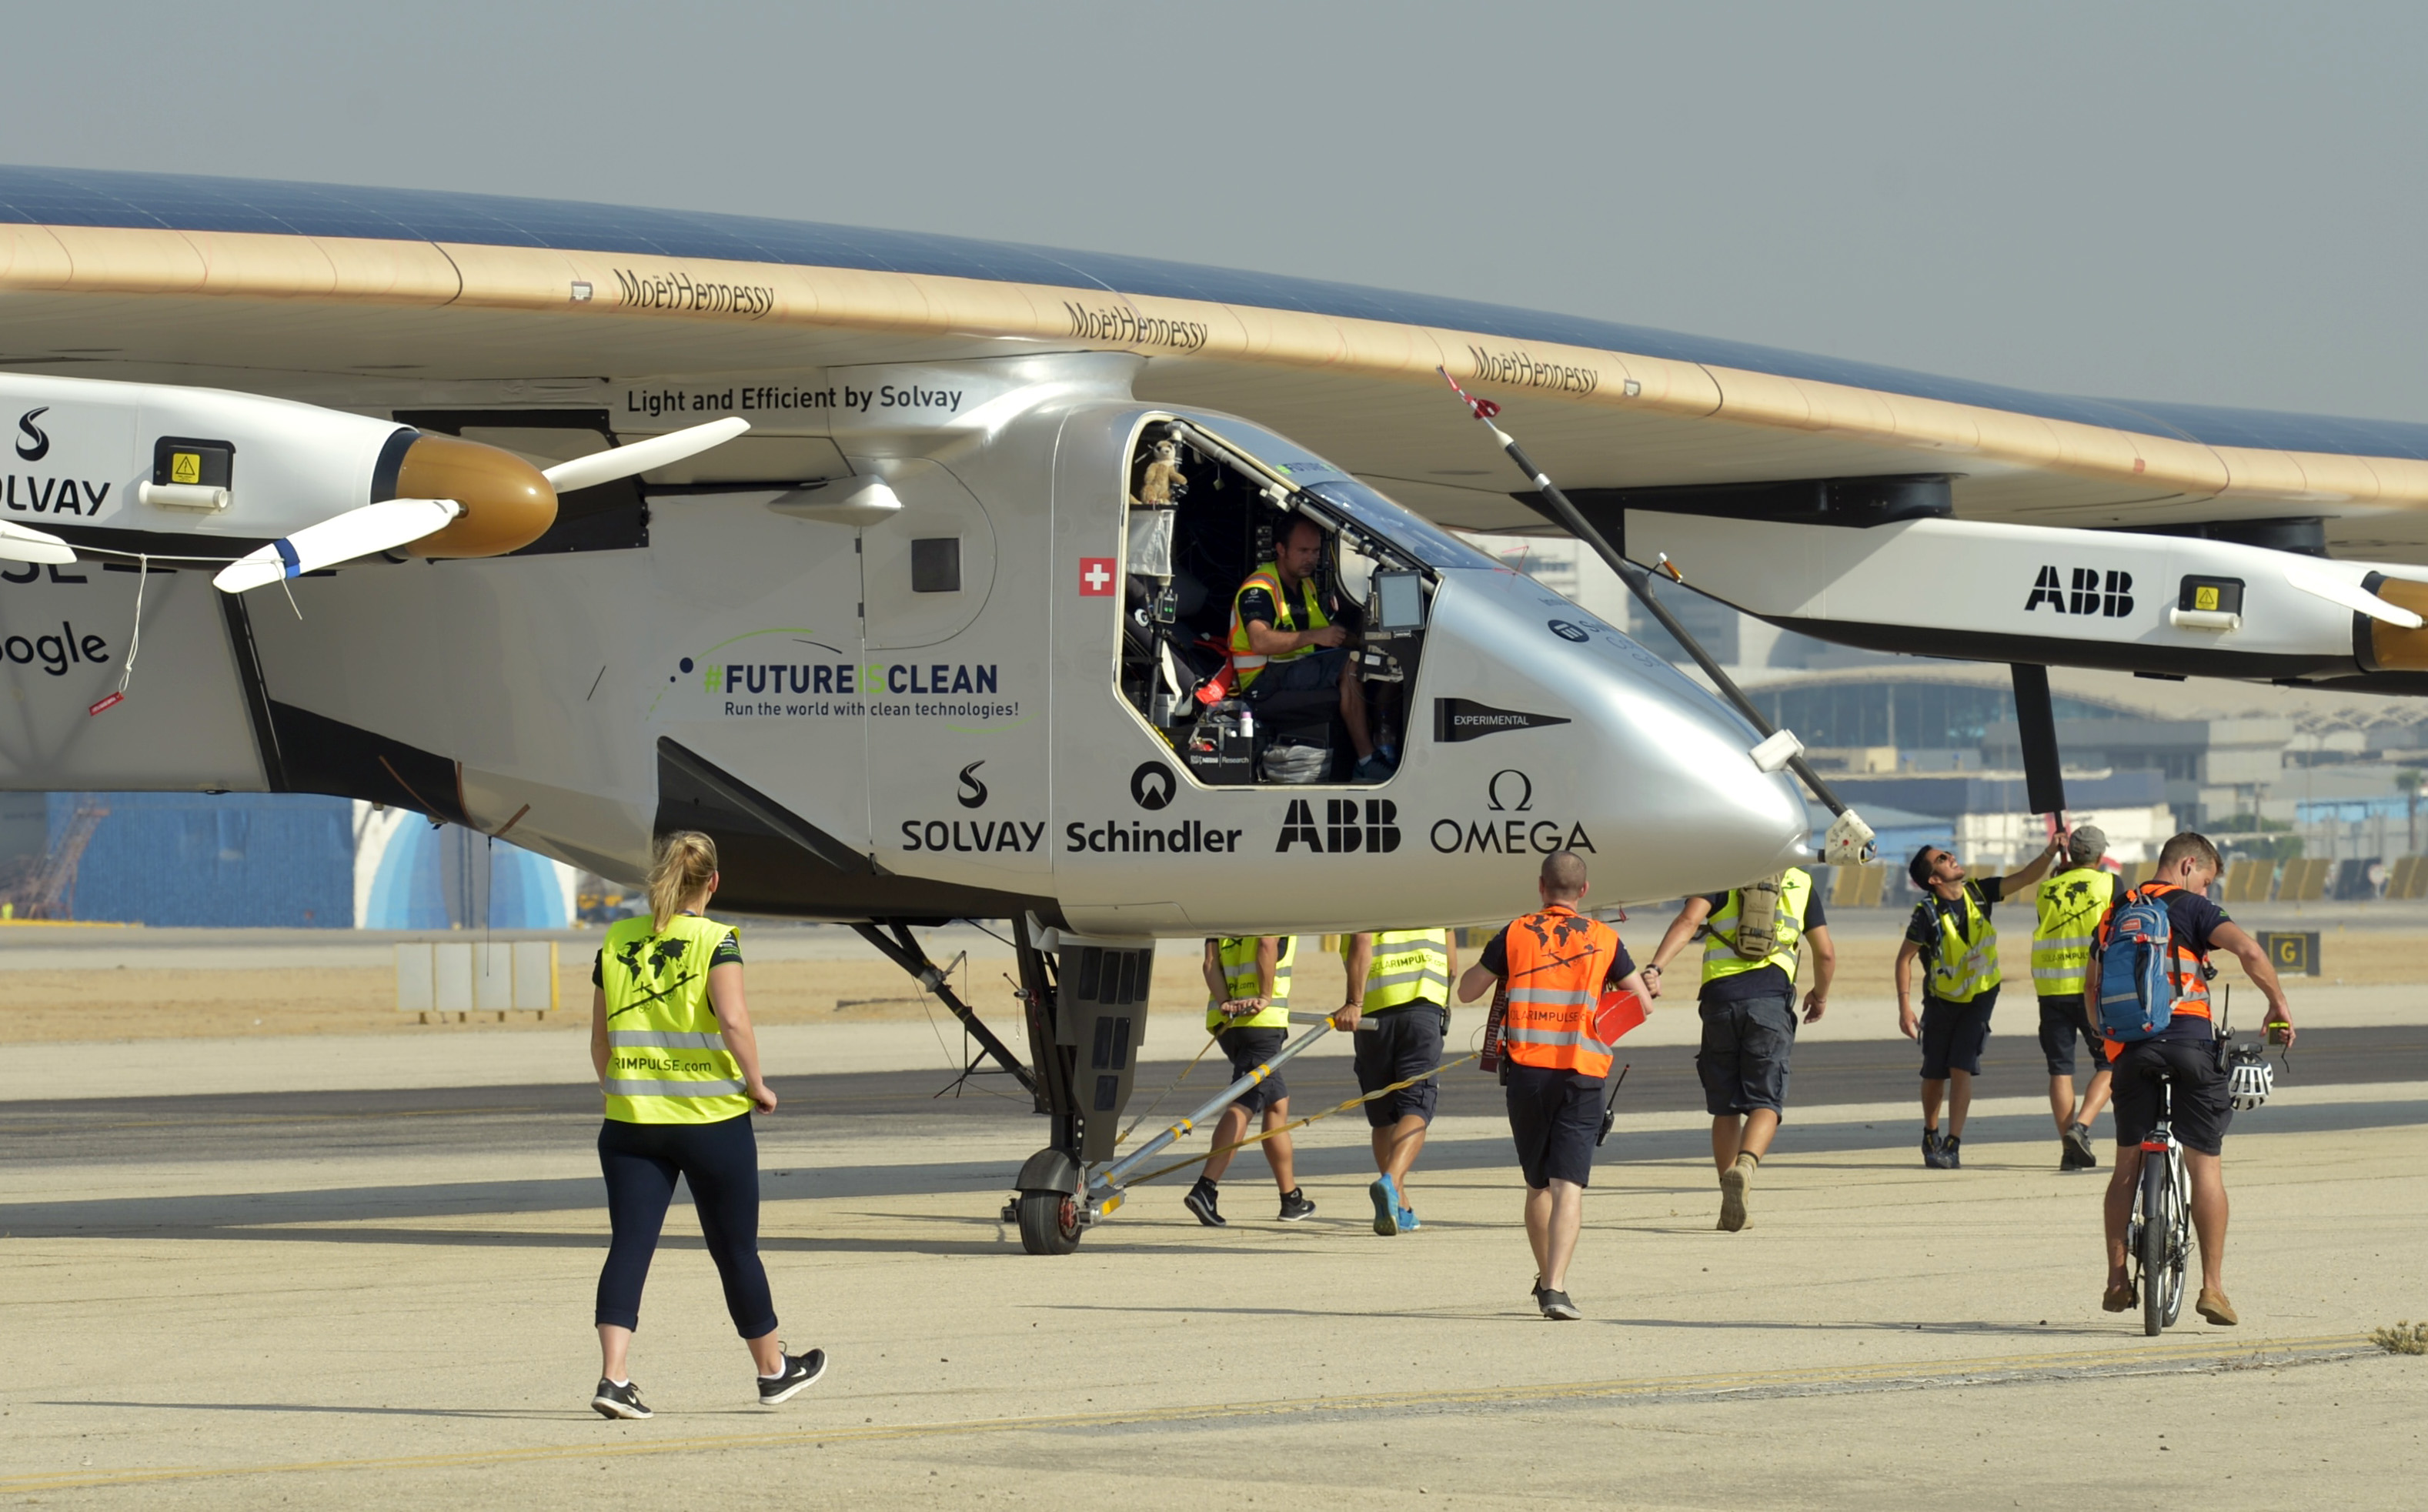 The ground crew of Solar Impulse 2, the solar powered plane, surrounds the aircraft after it landed at Cairo International Airport on July 13, 2016, for the penultimate stage of its world tour. The round-the-world solar flight is estimated to take some 500 flight hours and cover 35,000 km with Swiss founders and pilots, Bertrand Piccard and Andre Borschberg landing every few days to switch between piloting and hosting public events.  / AFP PHOTO / KHALED DESOUKI